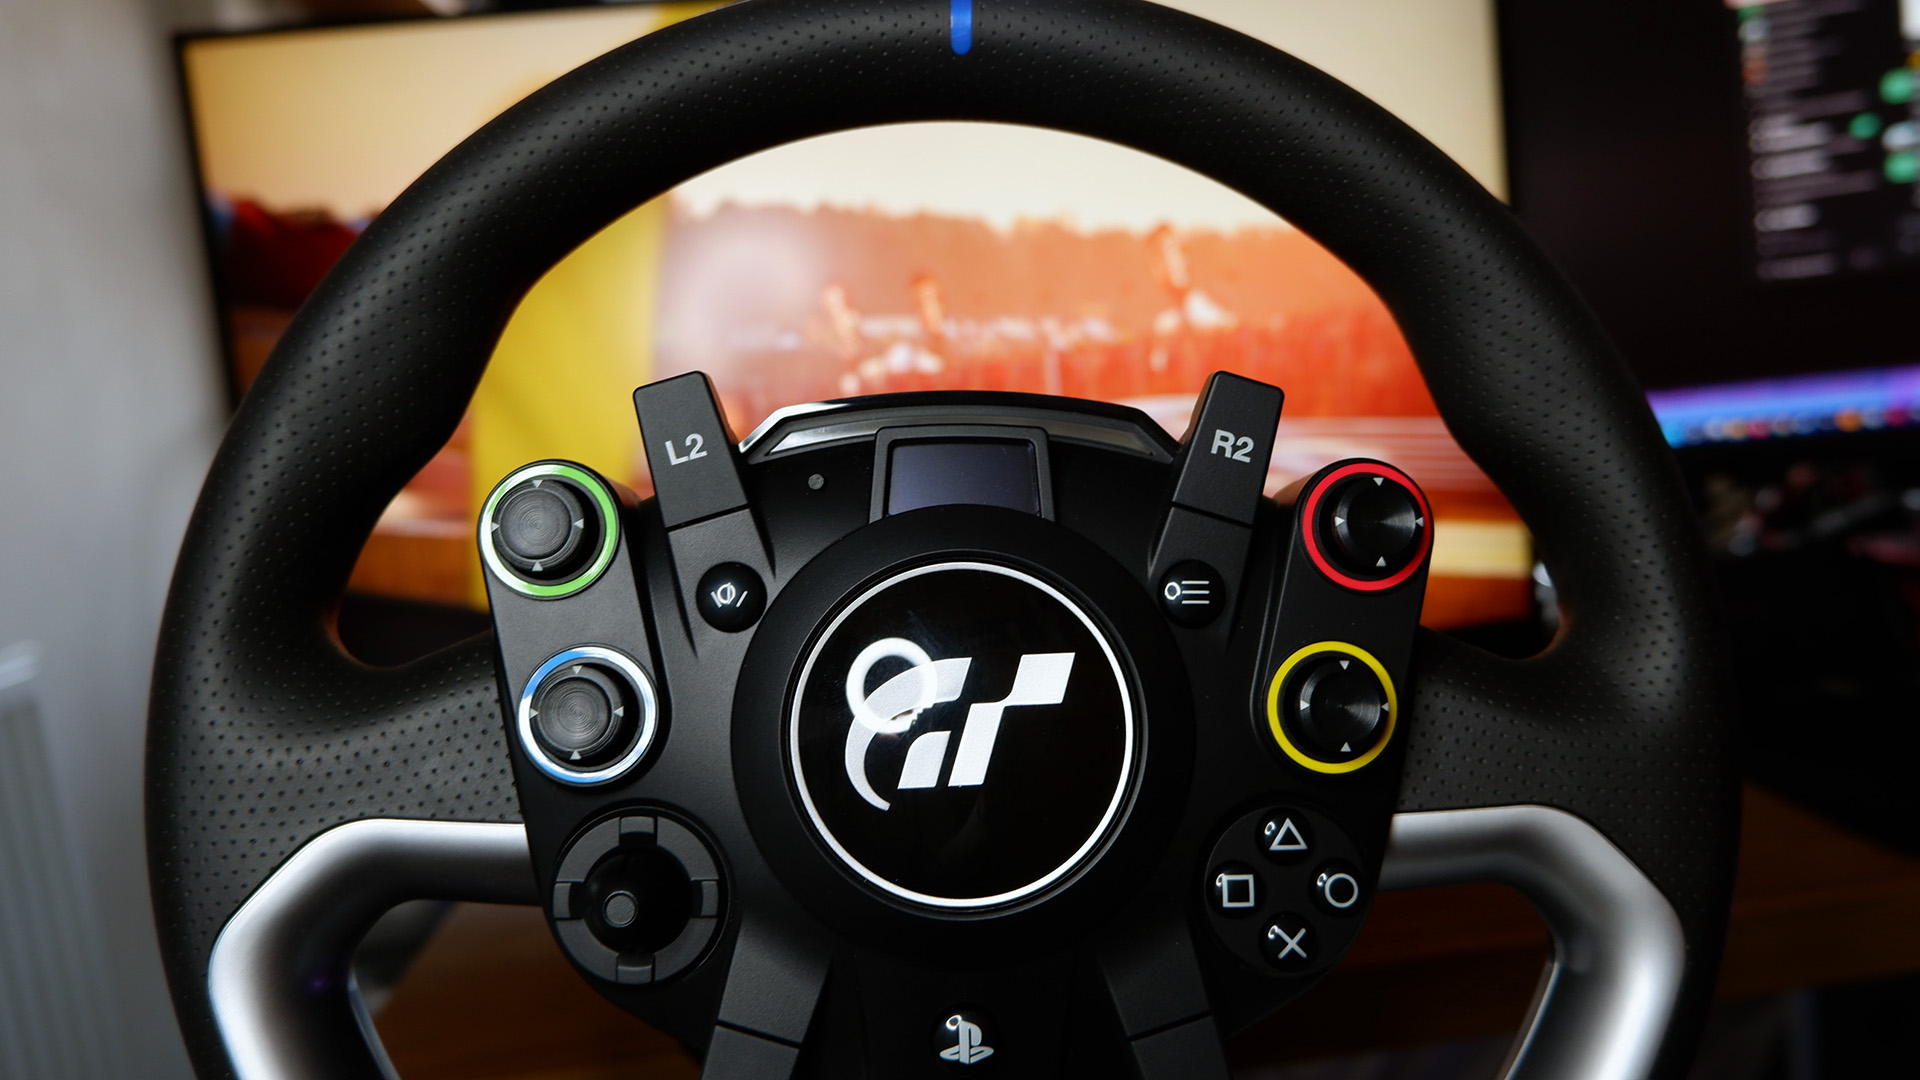 The Fanatec GT DD Pro racing wheel and wheelbase on a desk with monitor playing Assetto Corsa behind.